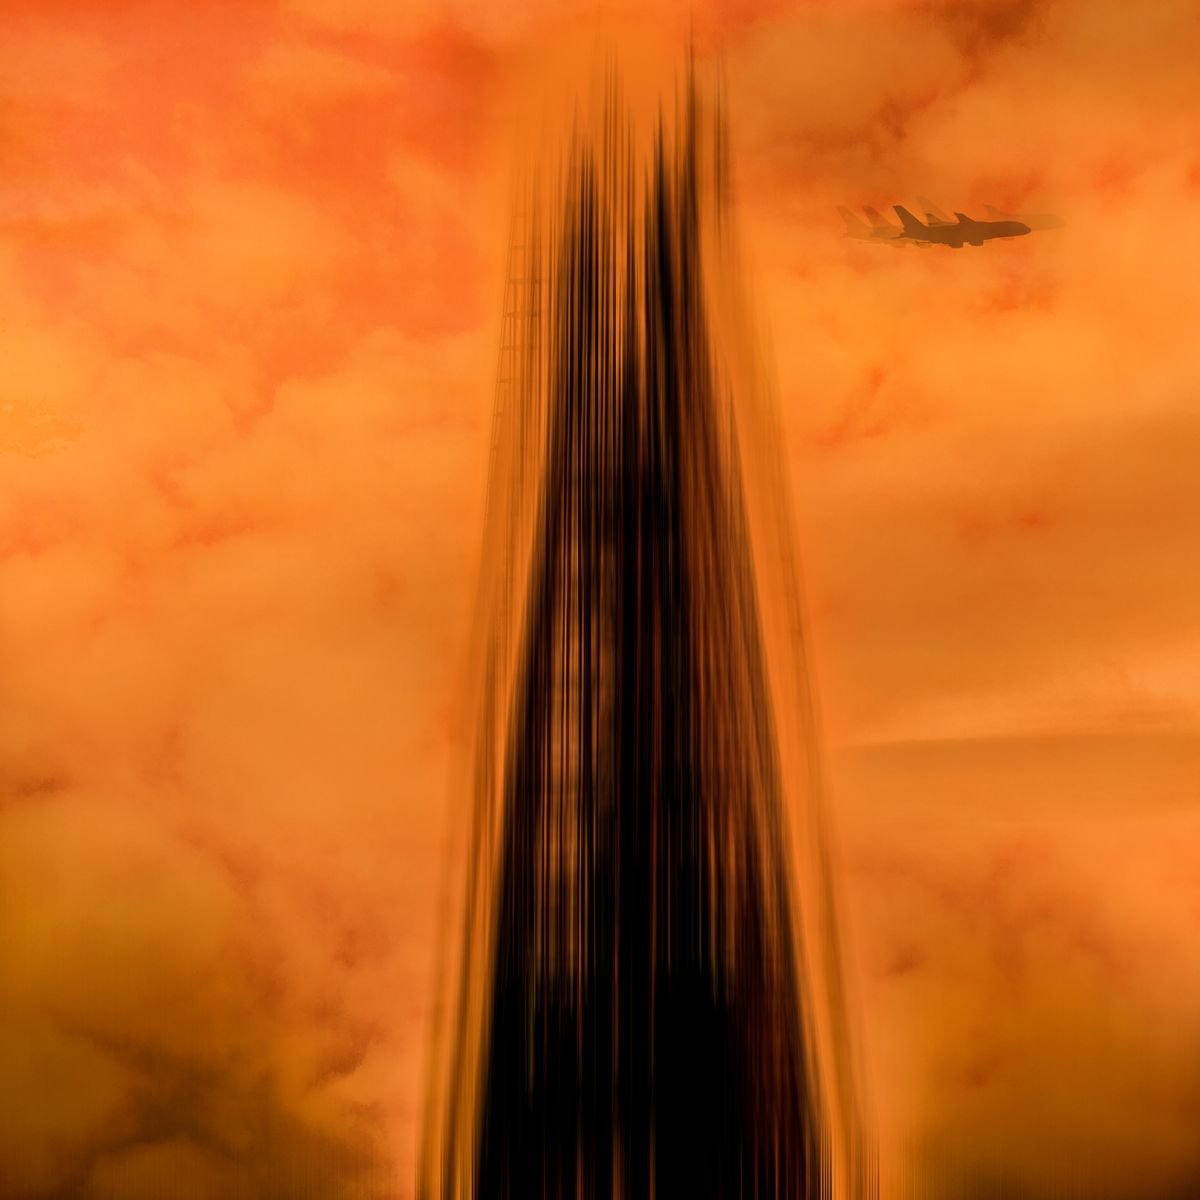 Abstract London: Shard and Plane by Graham Briggs